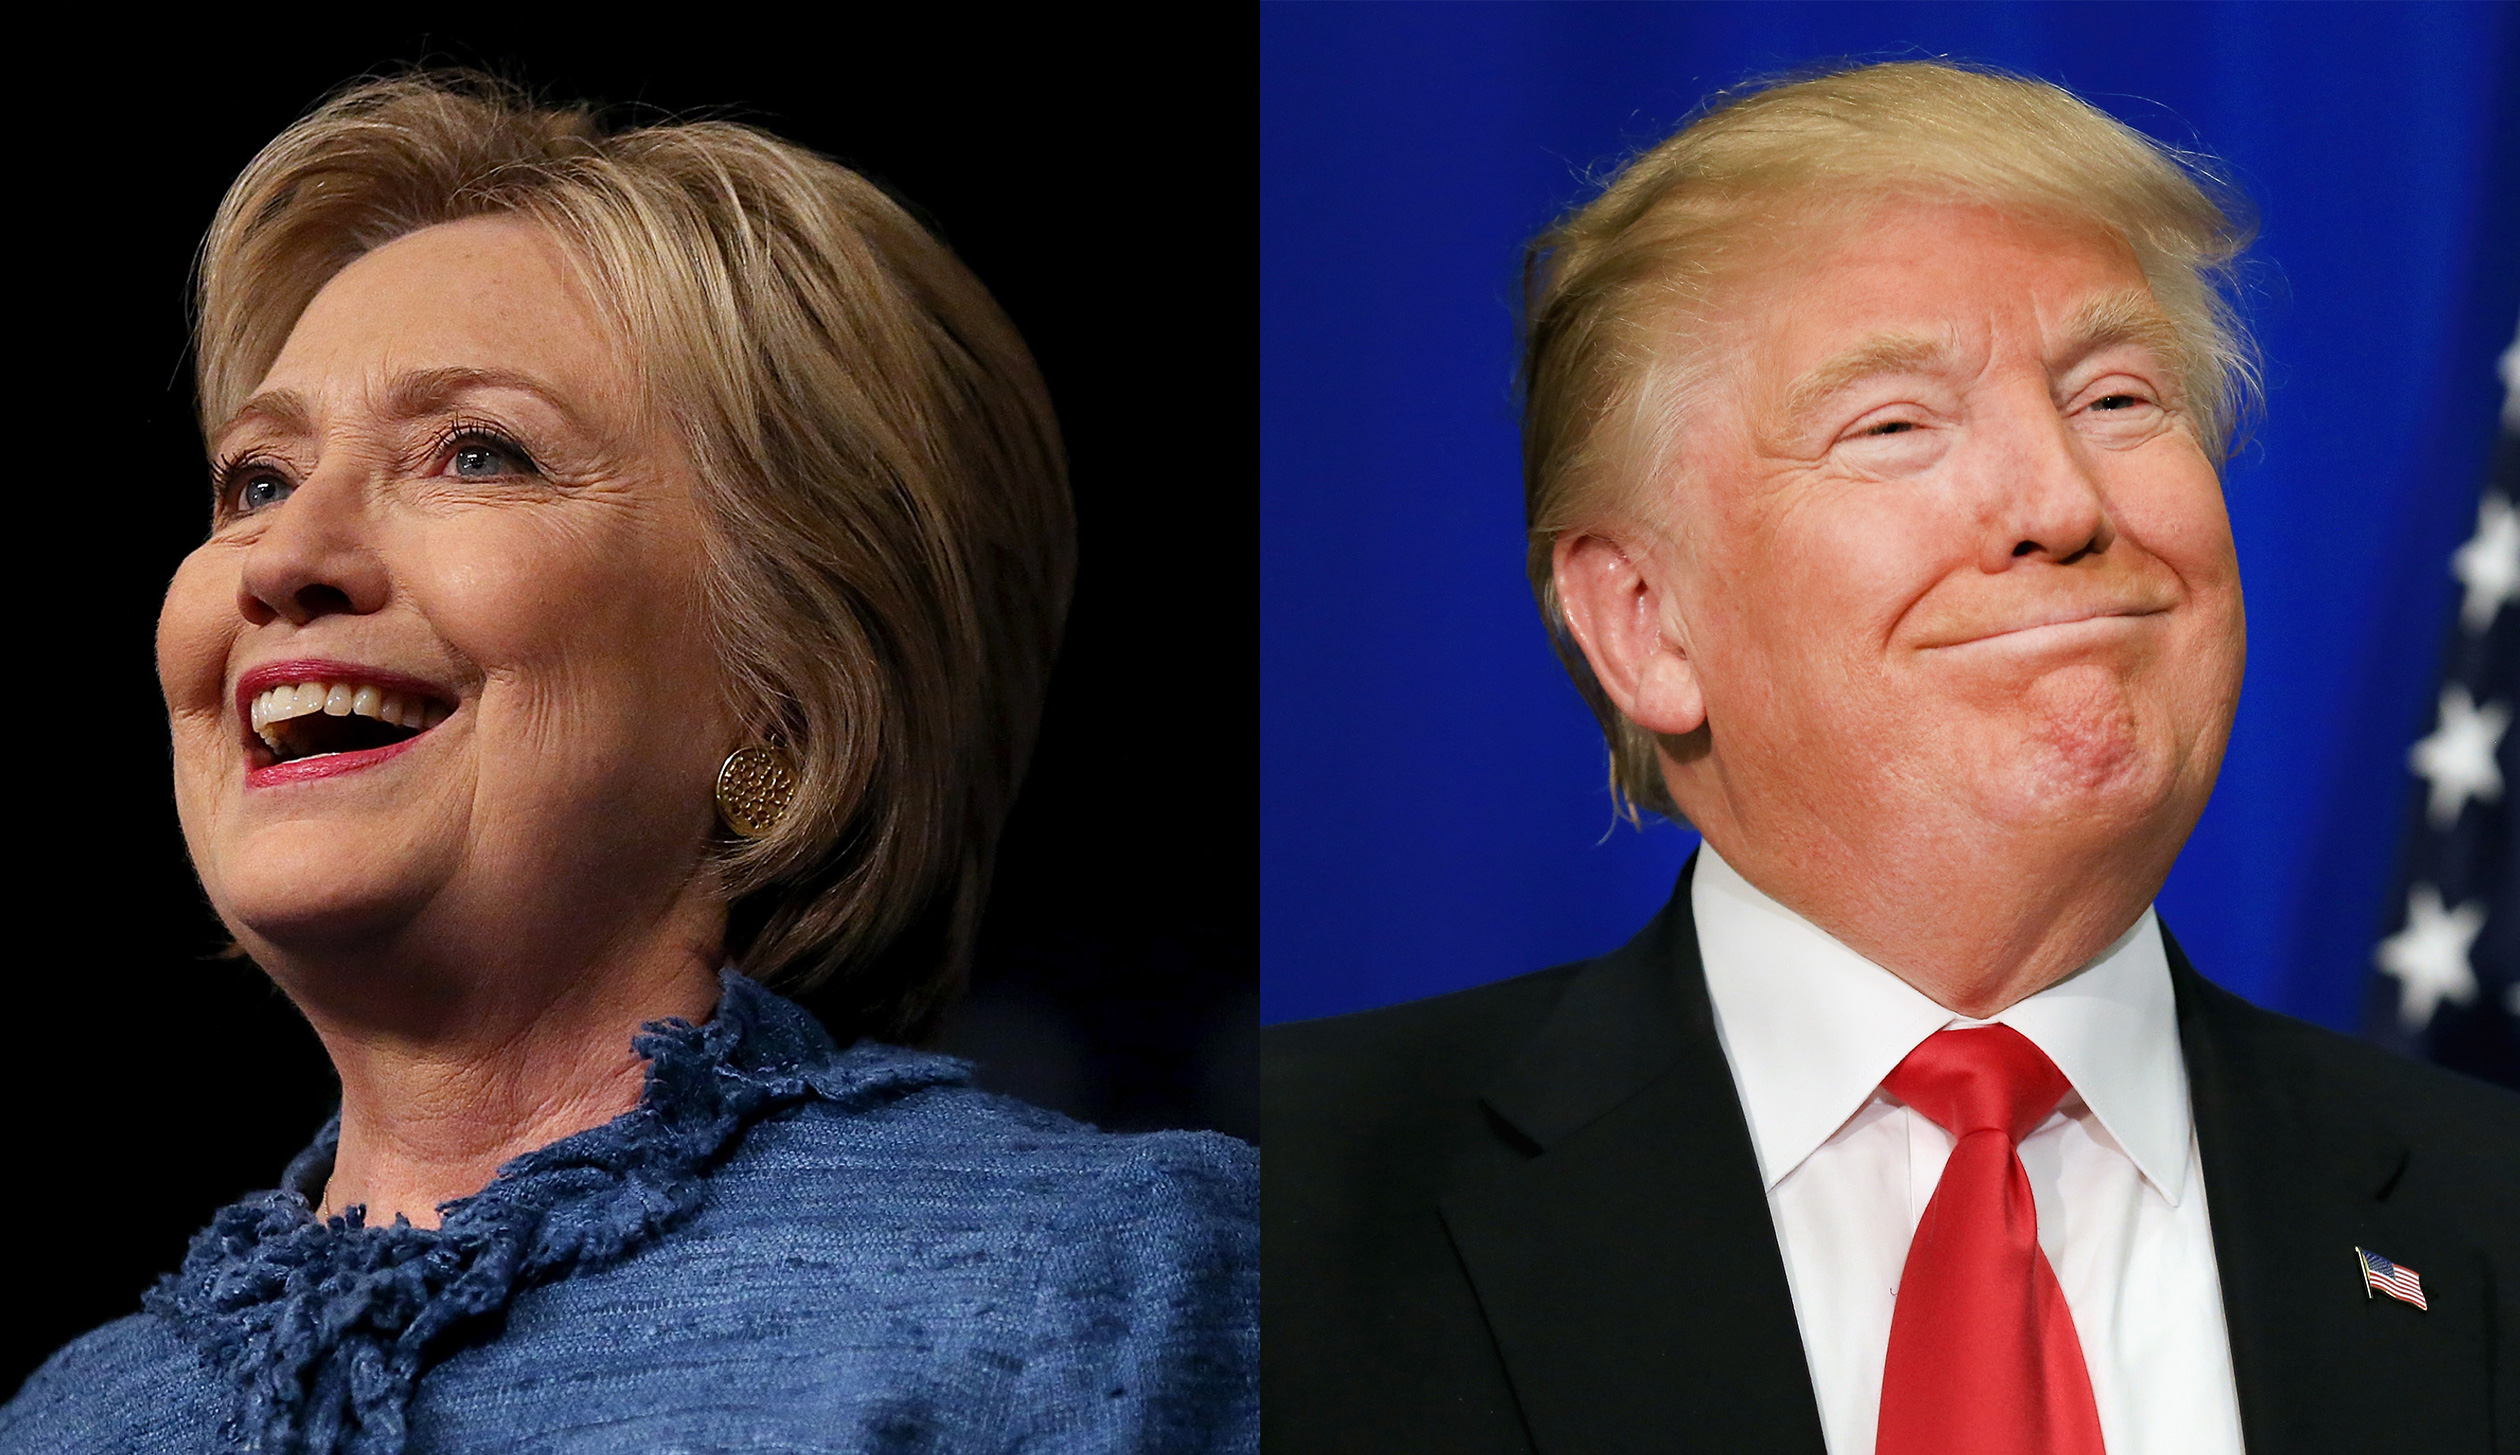 Video: Trump Sweeps 5 States, Clinton Takes 4, Sanders Wins 1 - Election Central2520 x 1455